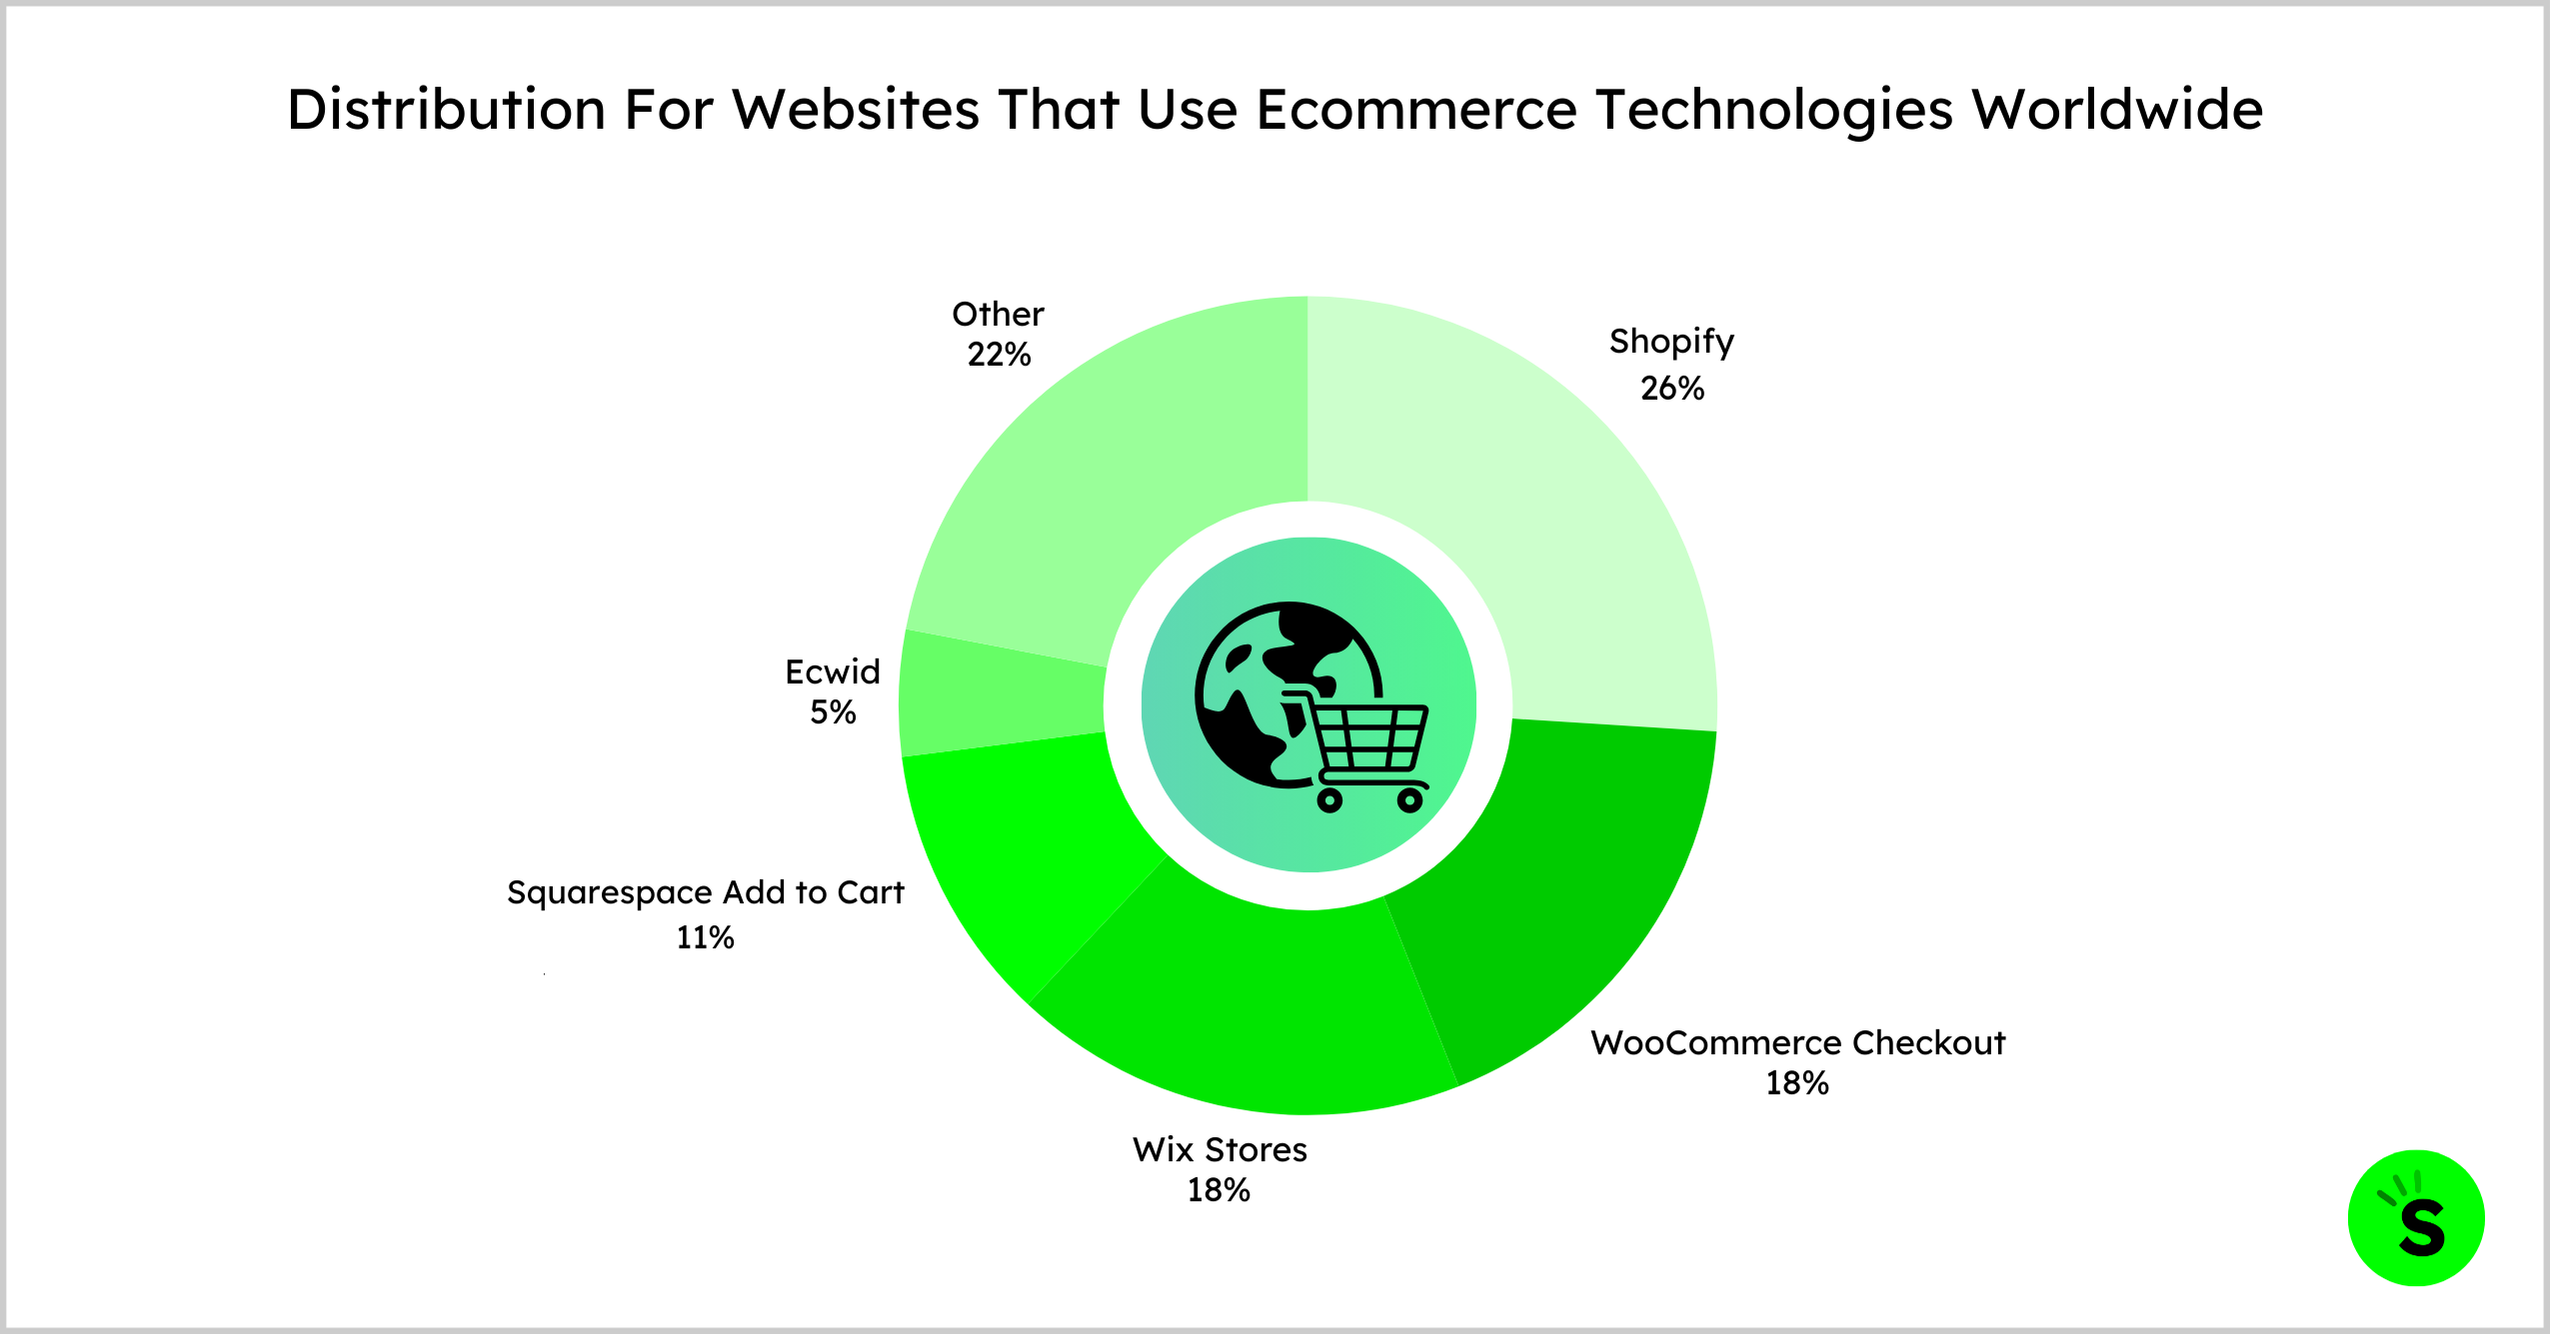 Distribution For Websites That Use Ecommerce Technologies